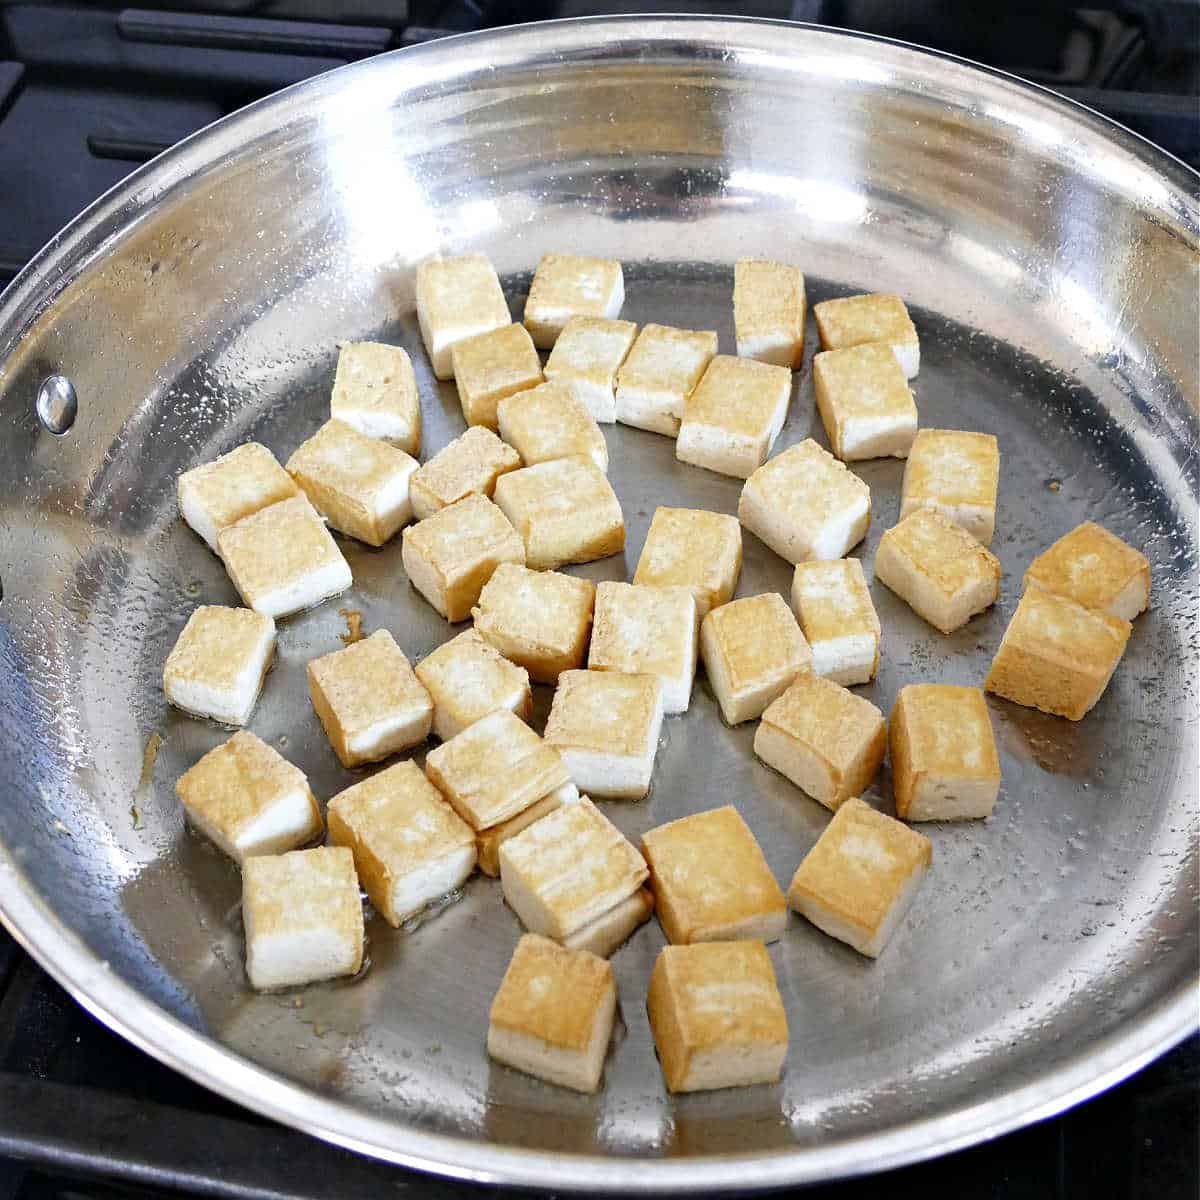 Searing the diced tofu in a large skillet.